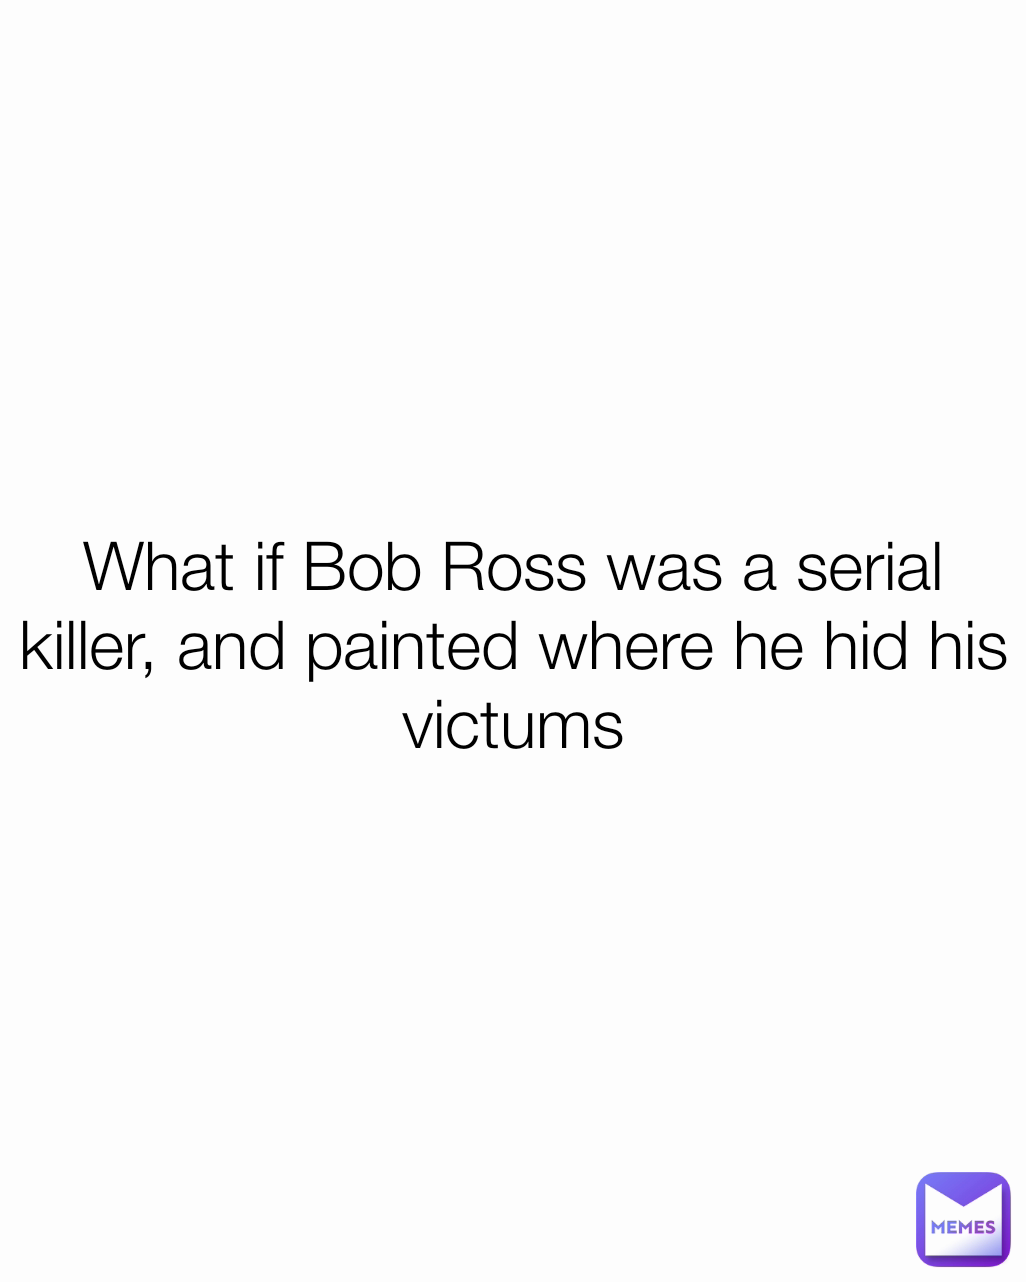 What if Bob Ross was a serial killer, and painted where he hid his victums